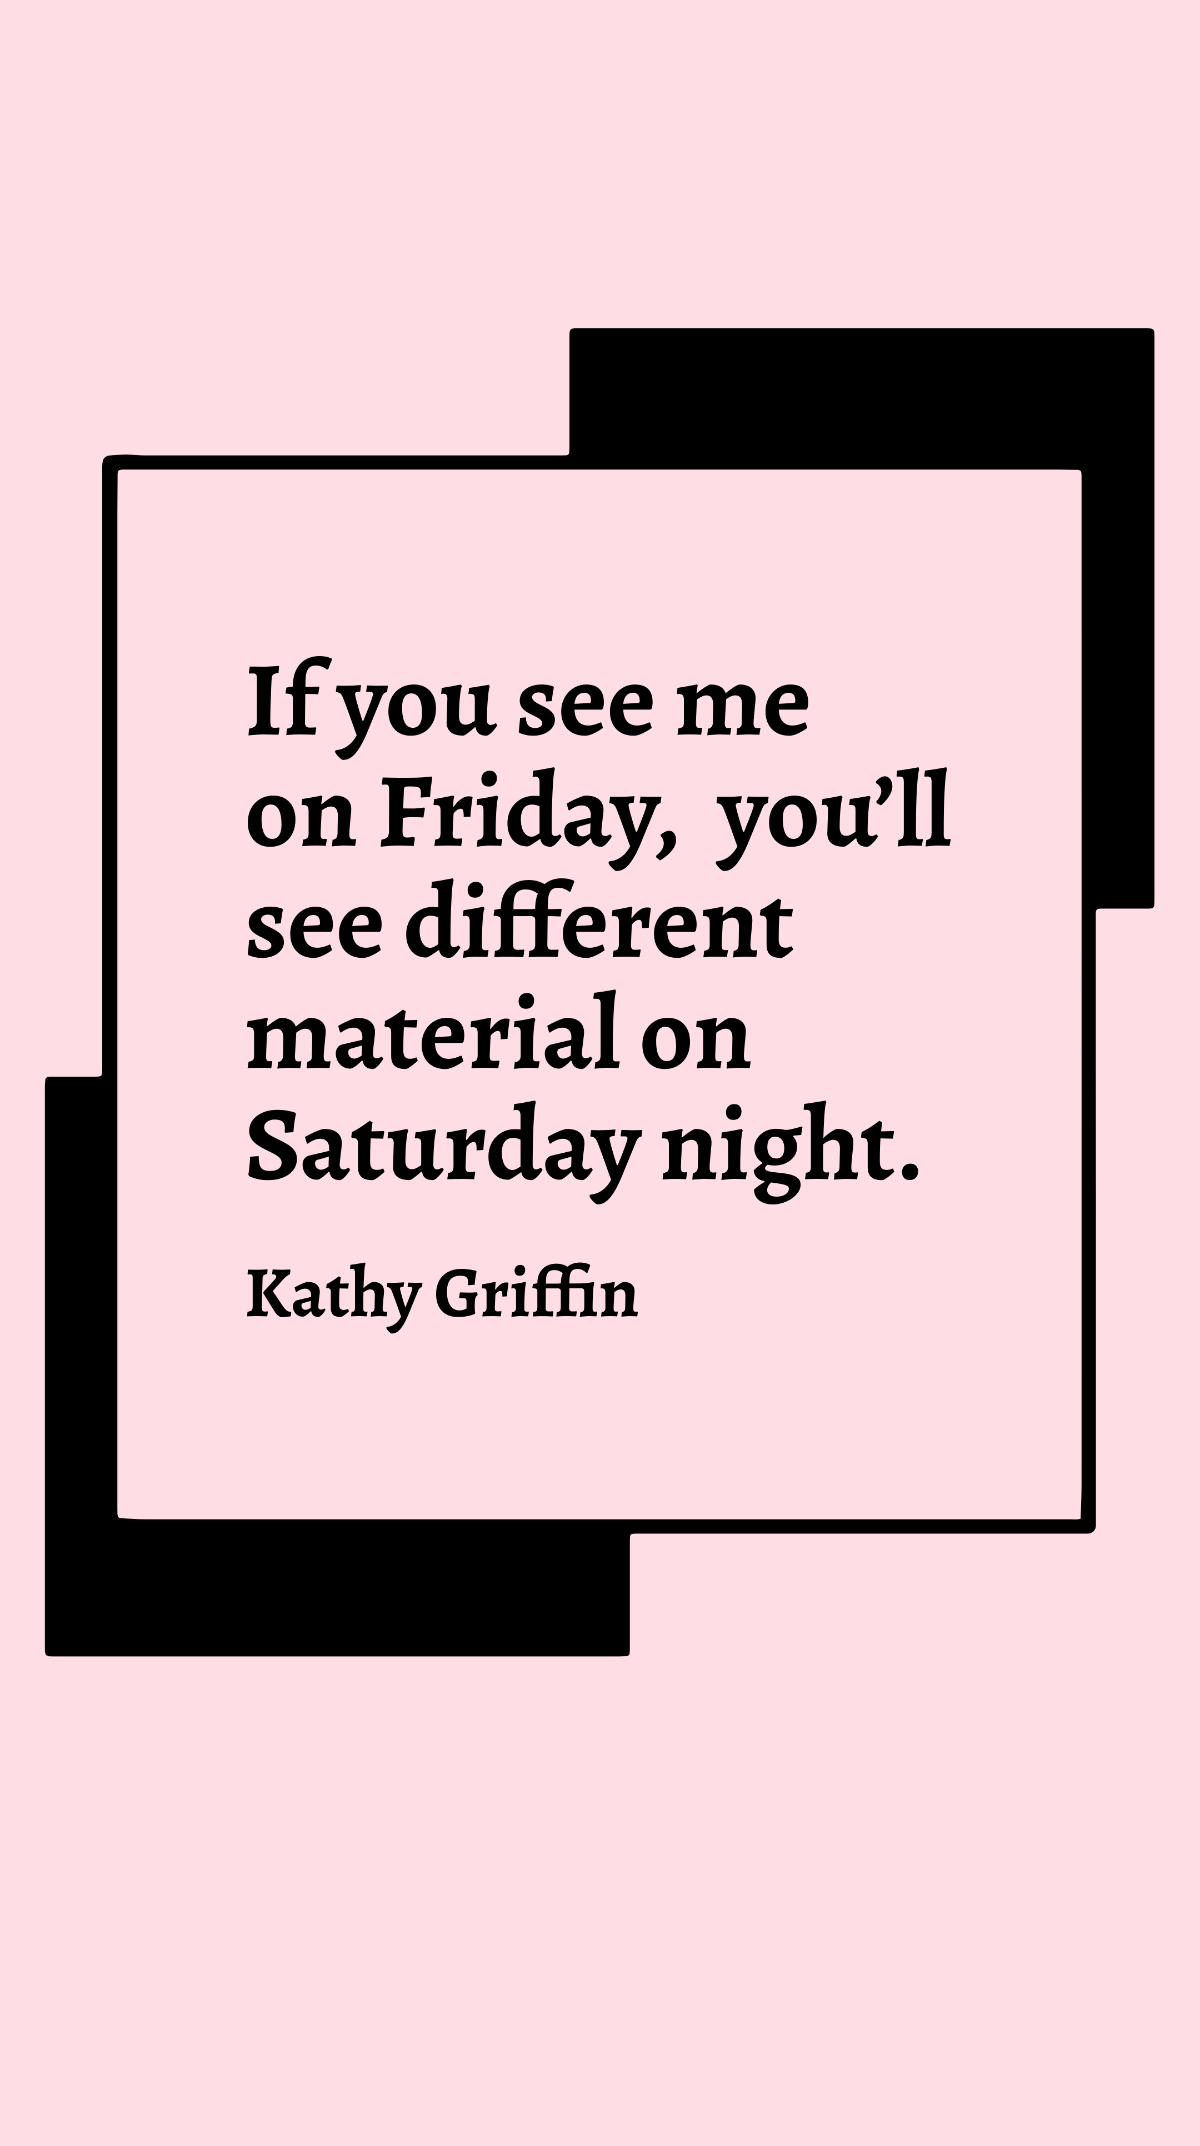 Kathy Griffin - If you see me on Friday, you’ll see different material on Saturday night.